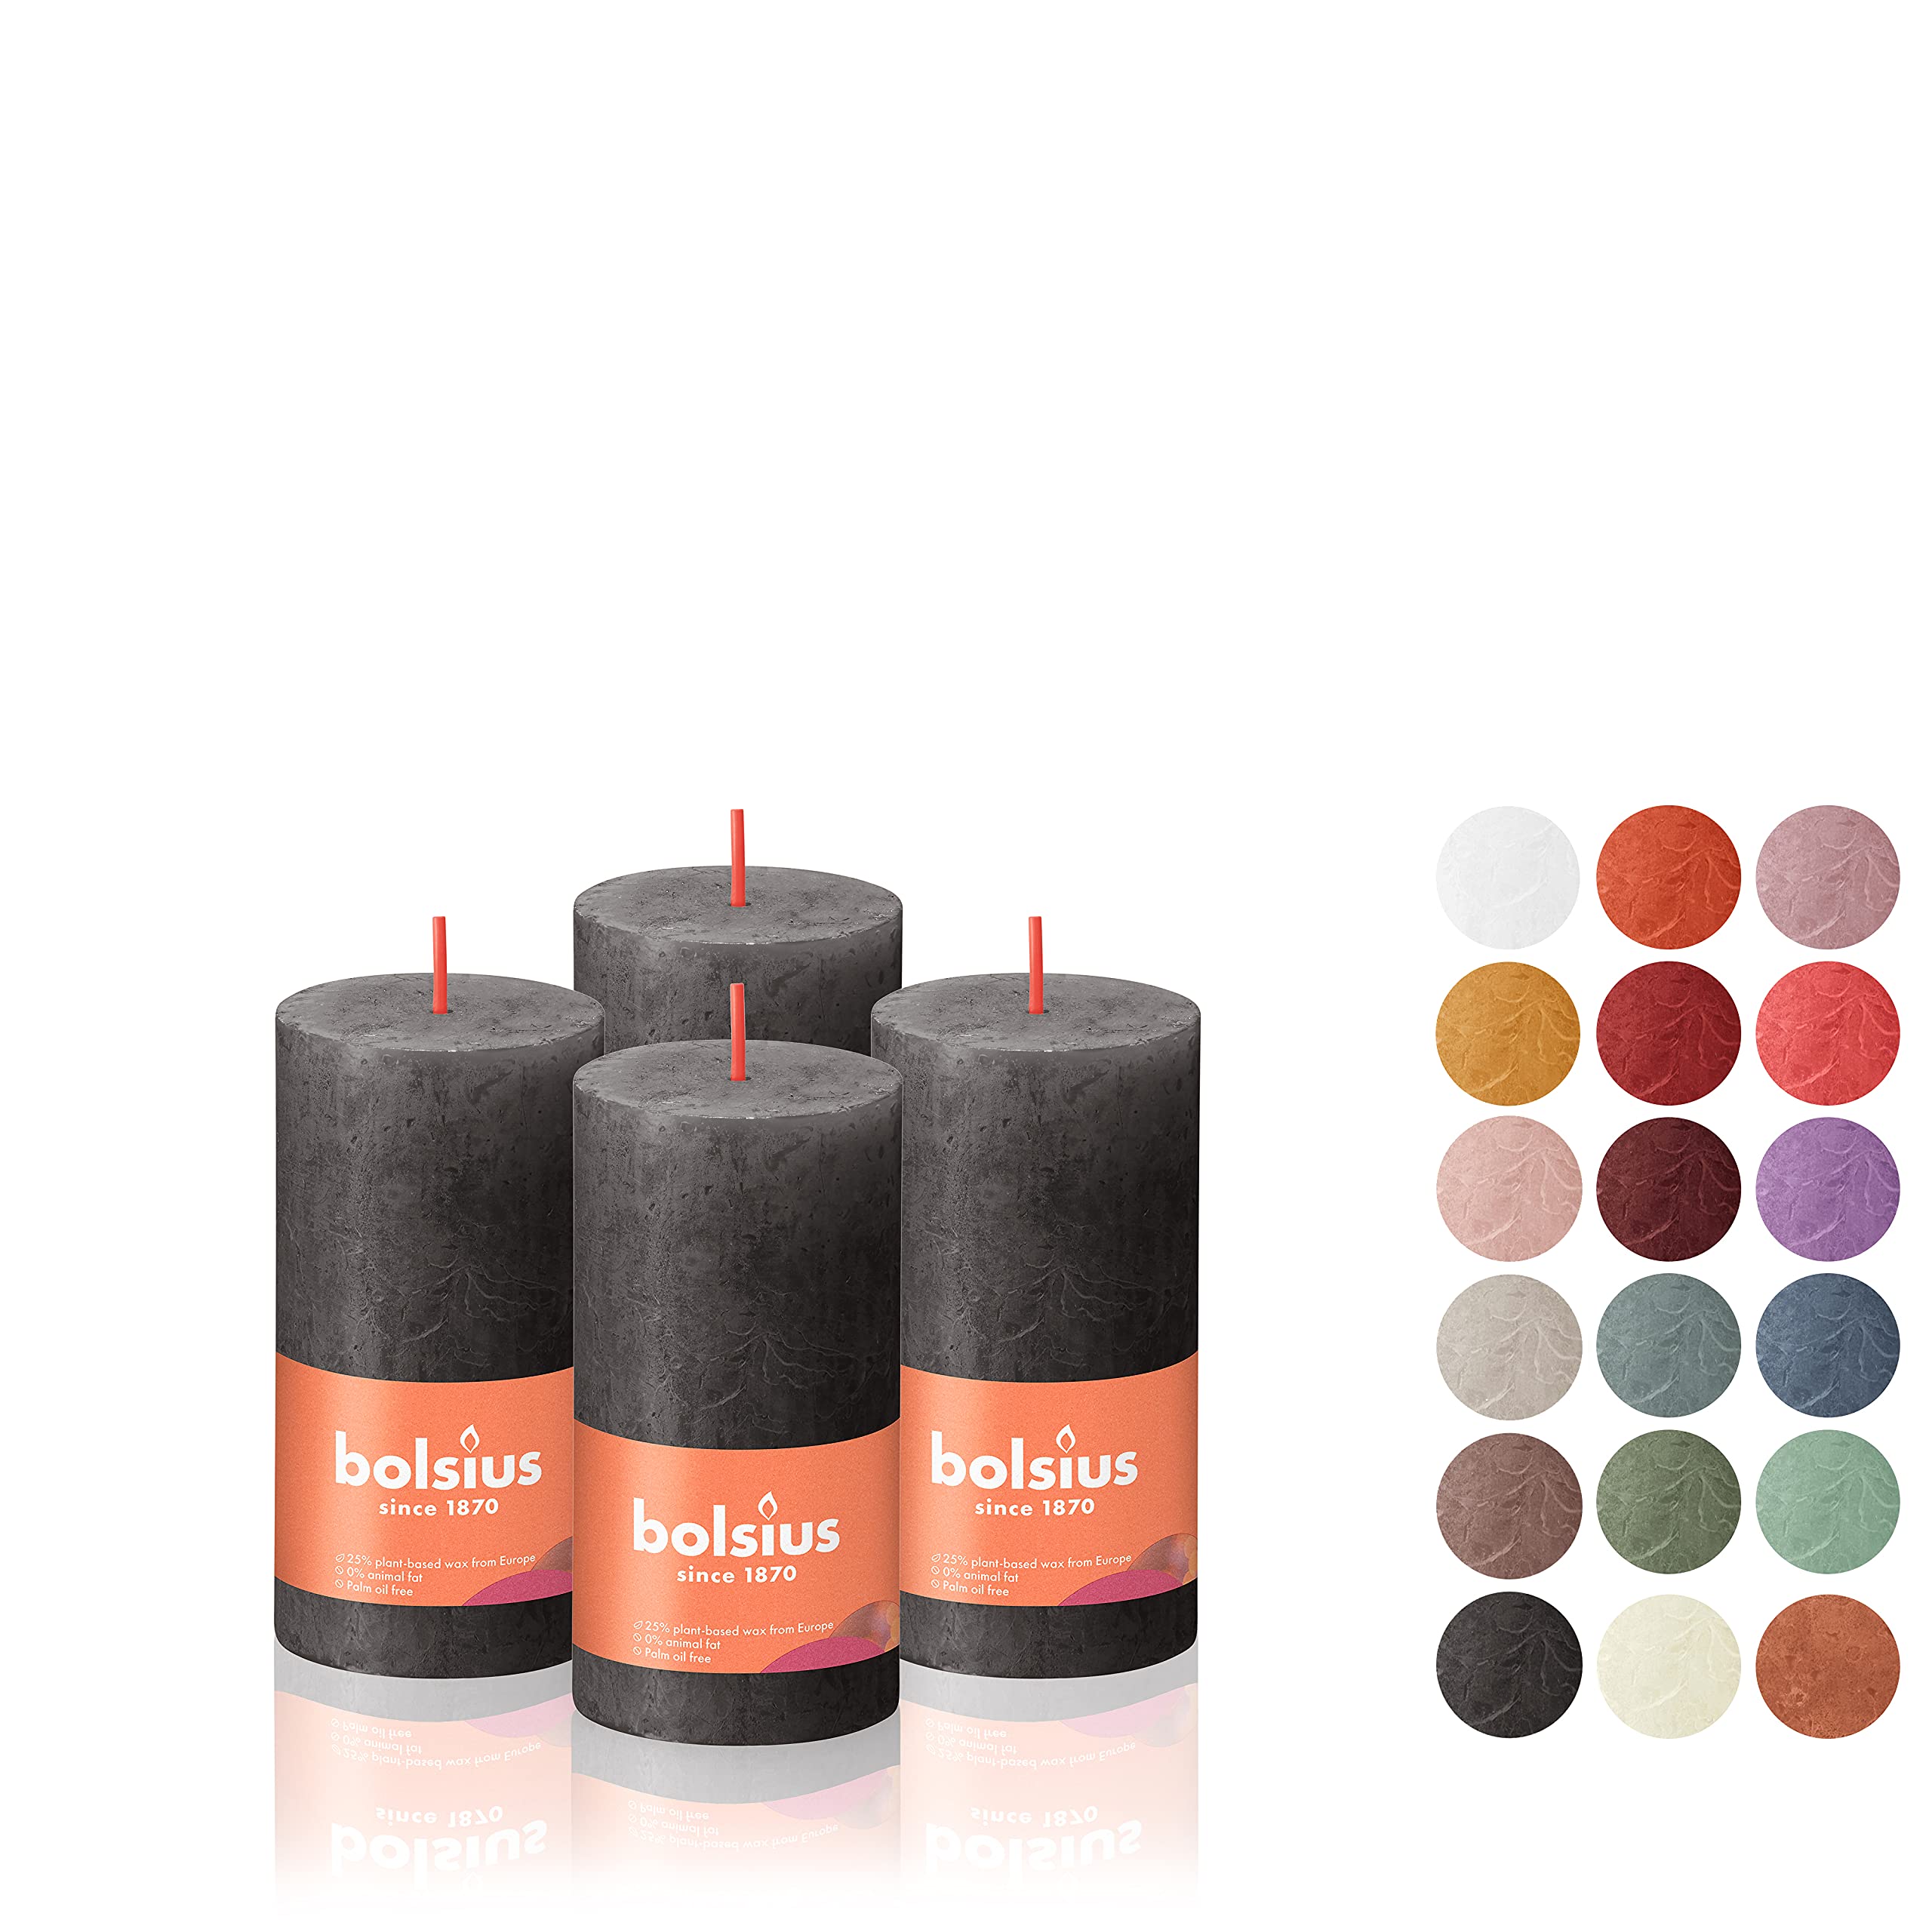 BOLSIUS 4 Pack Stormy Gray Rustic Pillar Candles - 2 X 4 Inches - Premium European Quality - Includes Natural Plant-Based Wax - Unscented Dripless Smokeless 30 Hour Party D�cor and Wedding Candles  - Very Good